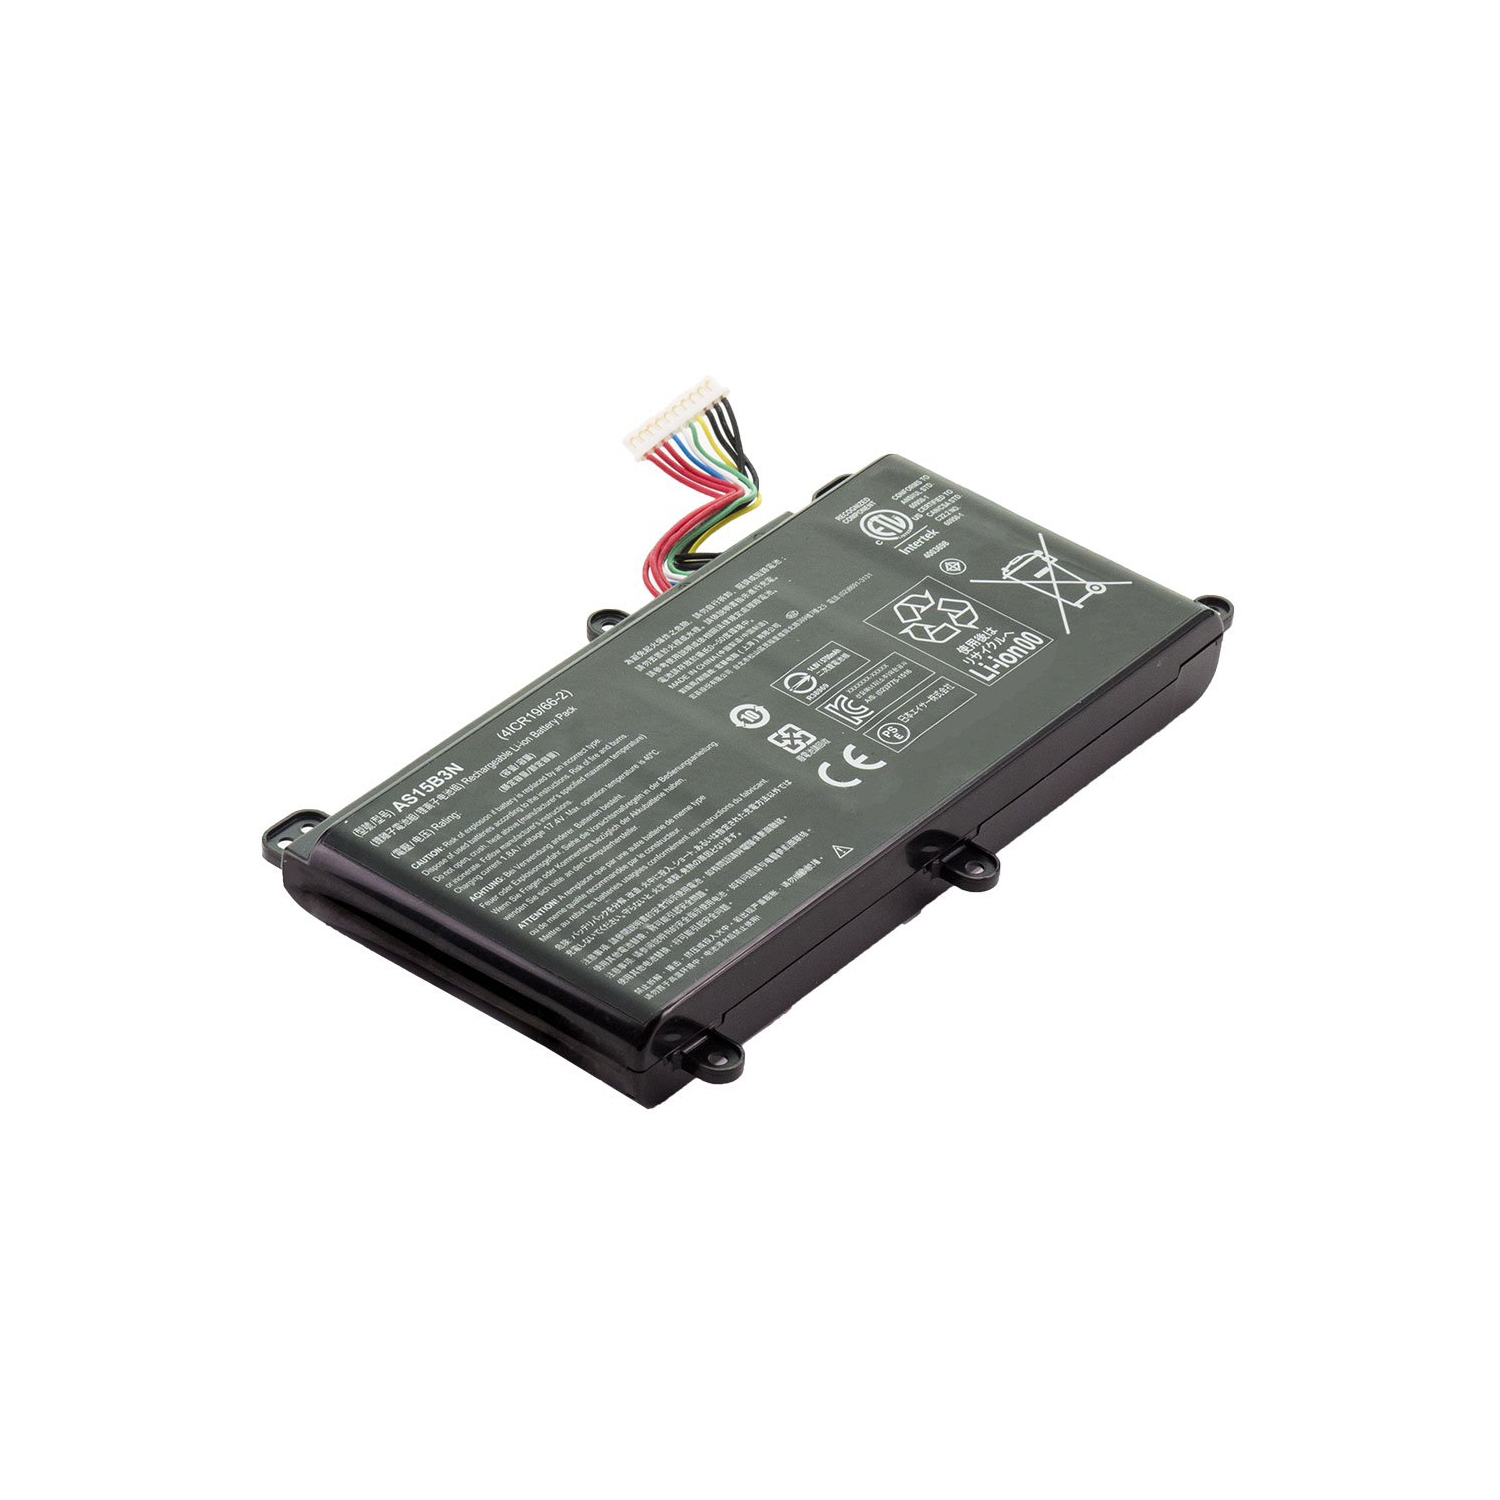 Laptop Battery Replacement for Acer Predator 17 G9-793-77LN, AS15B3N, KT.00803.004, KT.00803.005